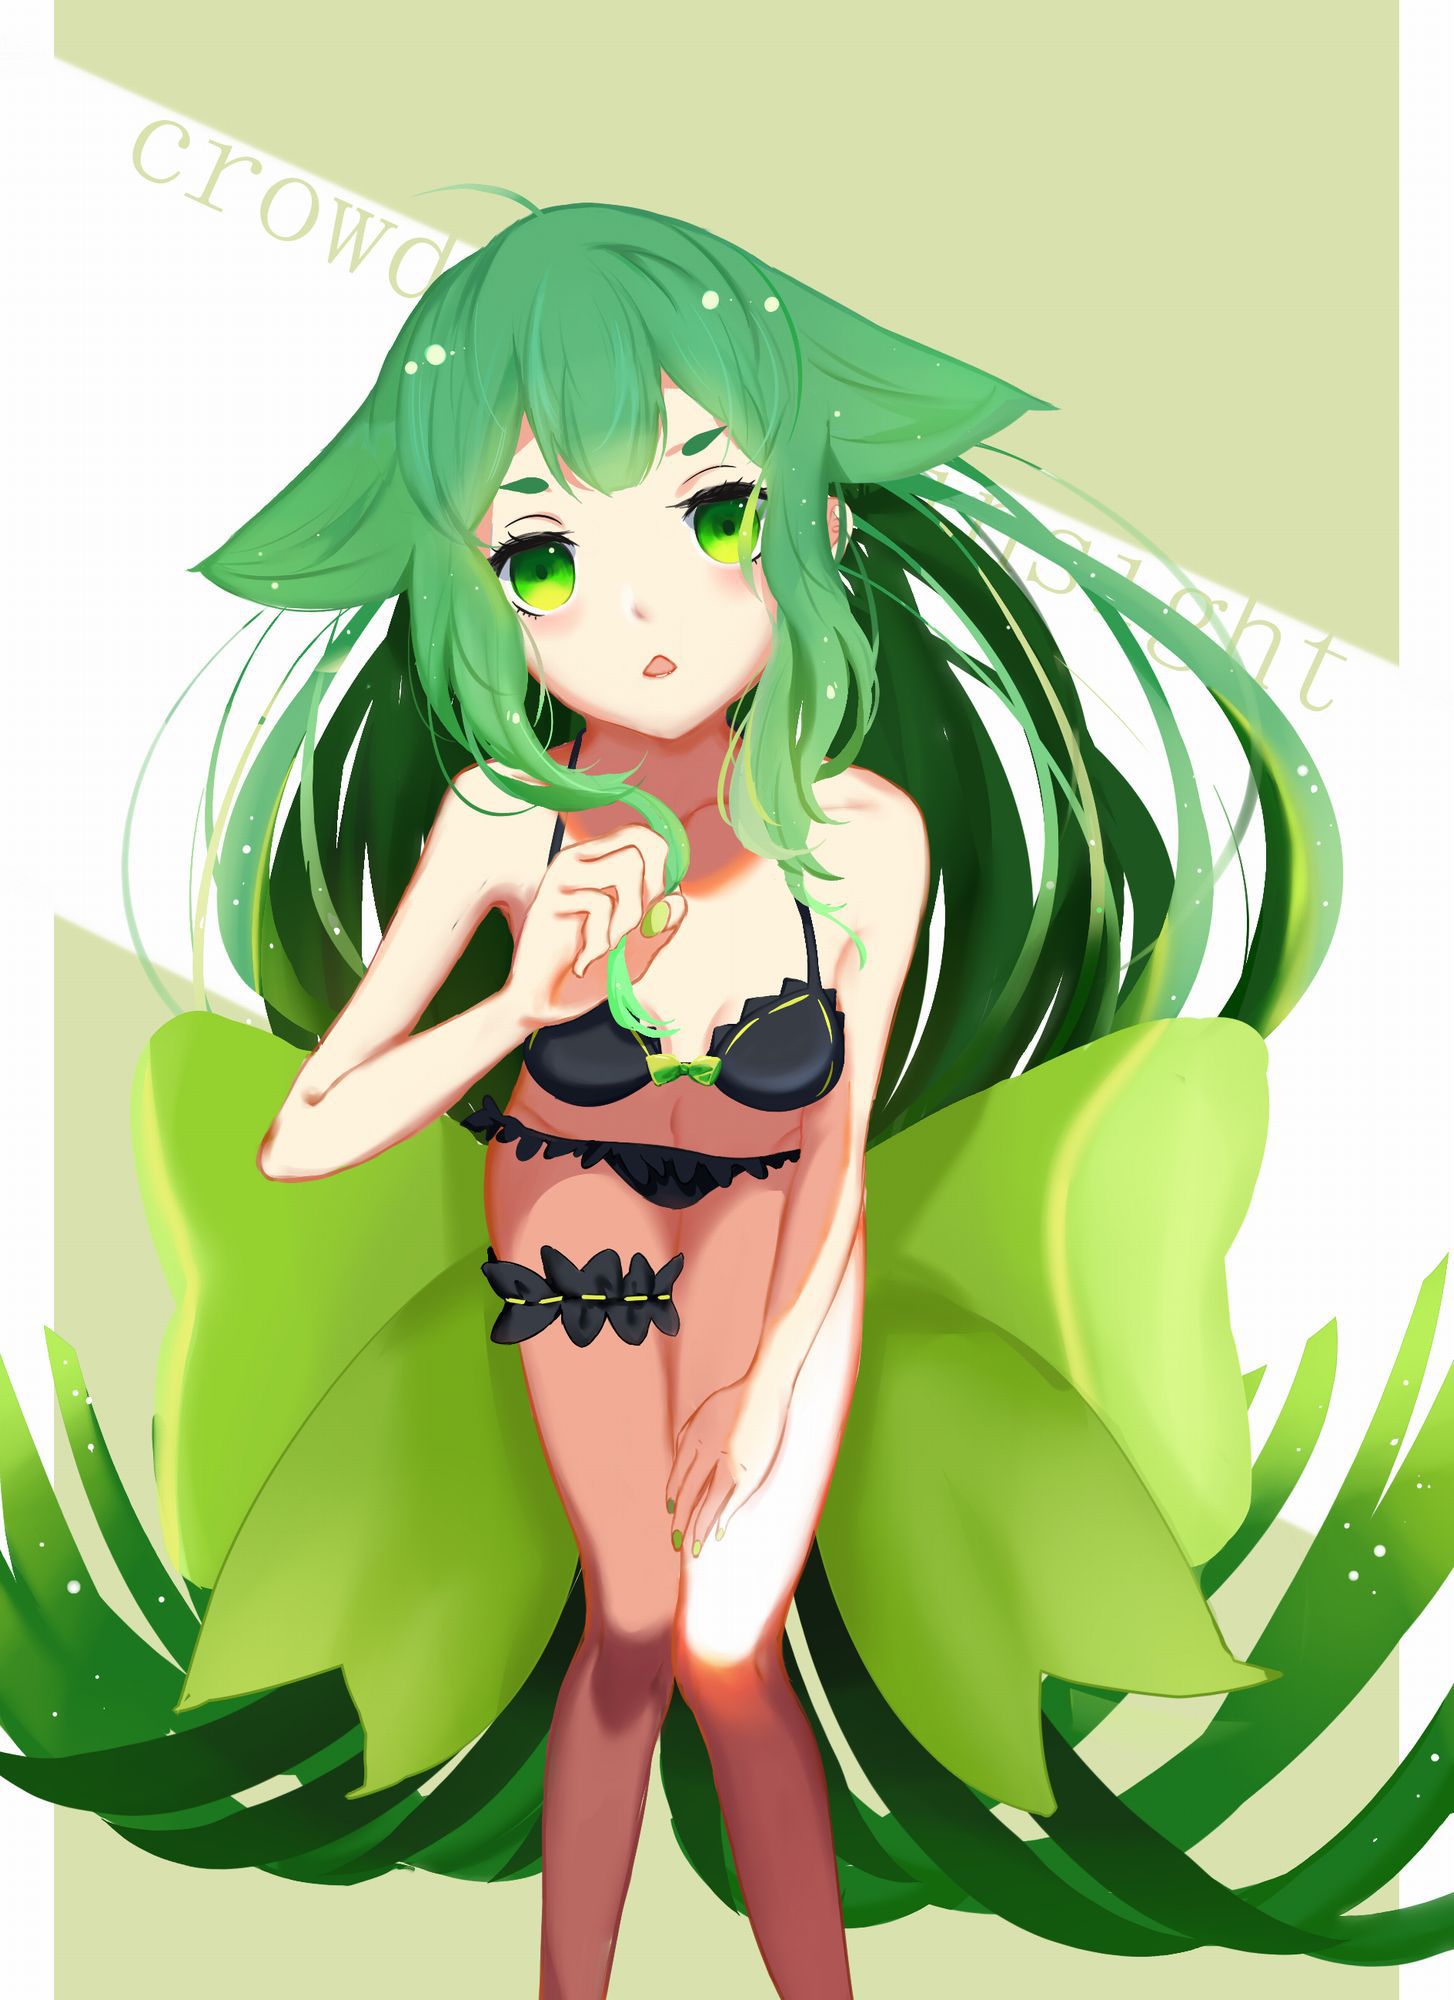 Healing Green! Secondary erotic pictures of girls with green hair wwww that 17 10